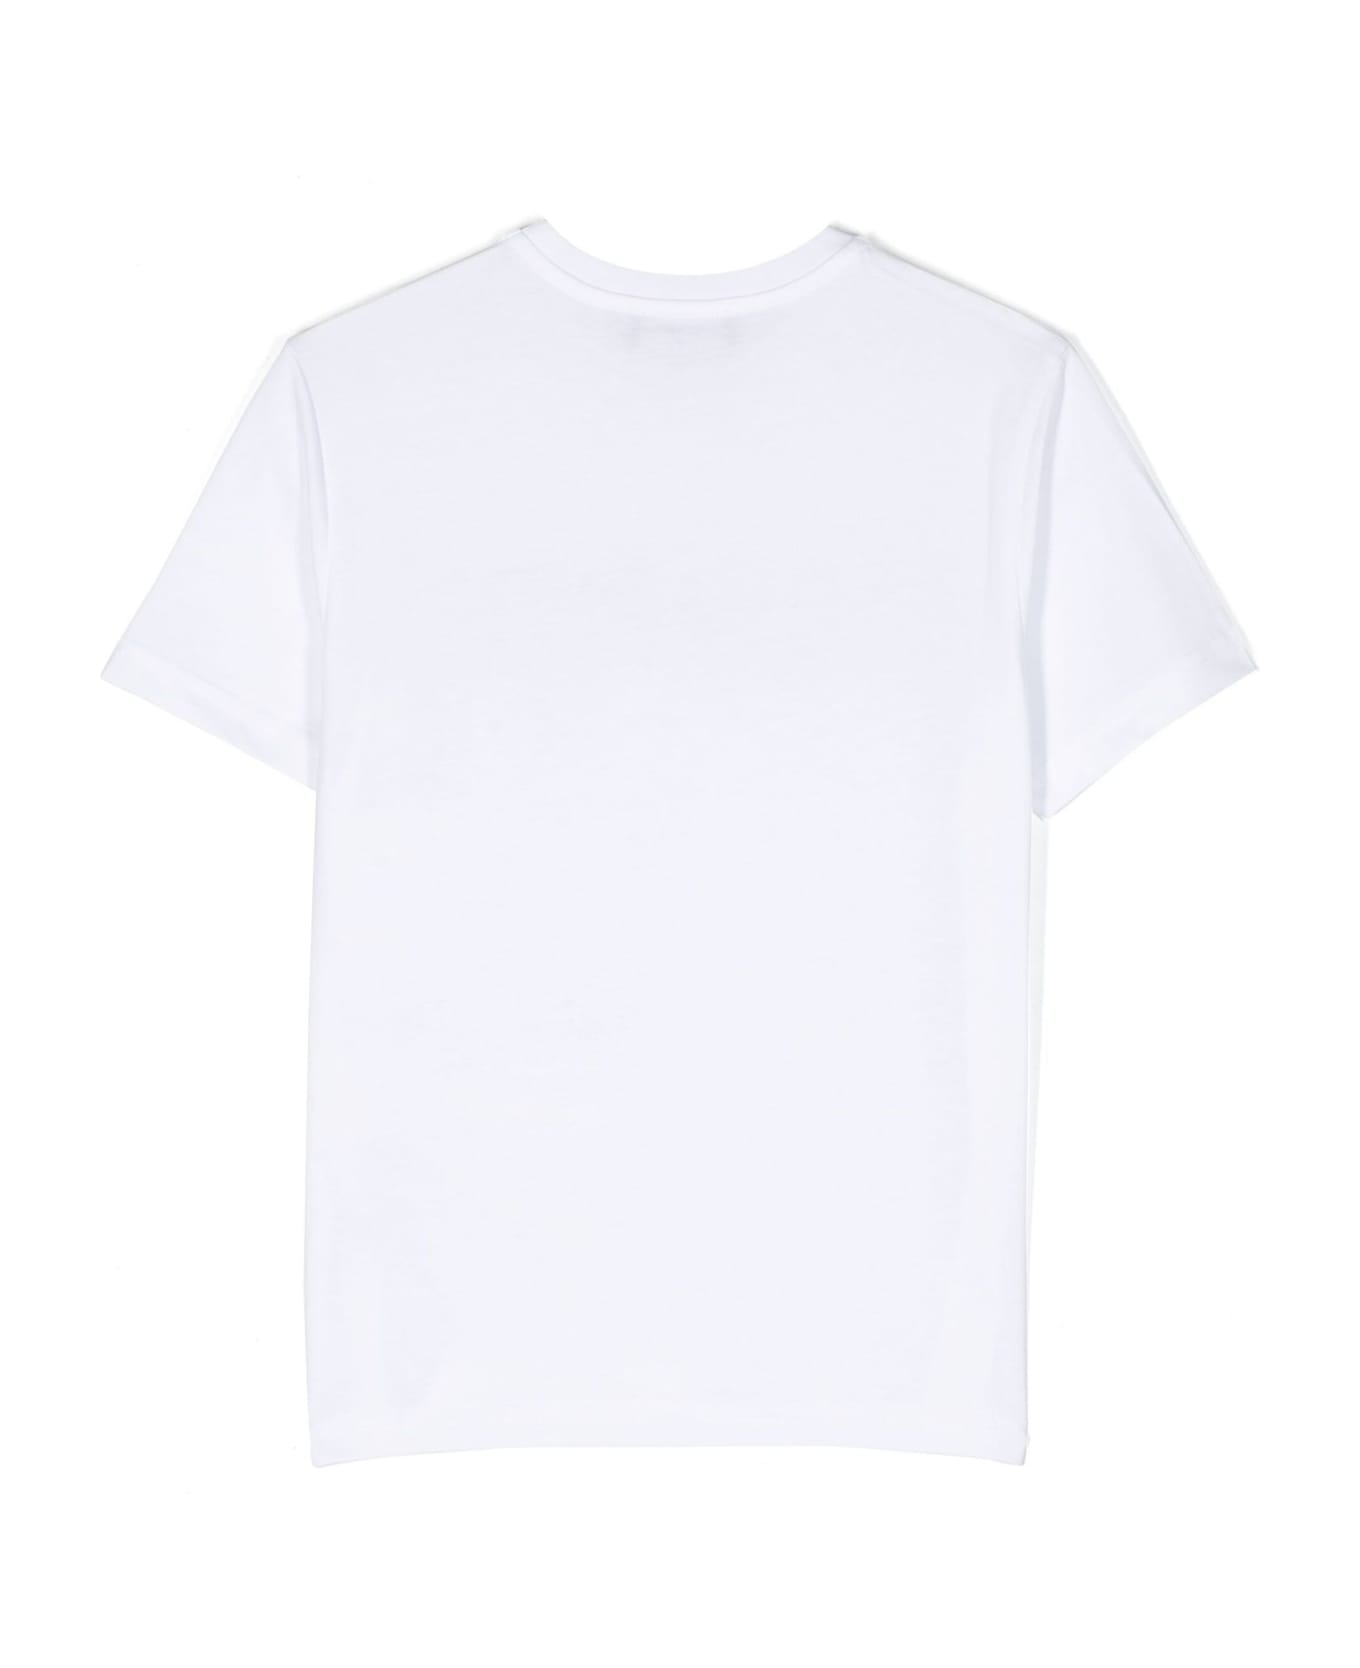 Dsquared2 T-shirts And Polos White - White Tシャツ＆ポロシャツ